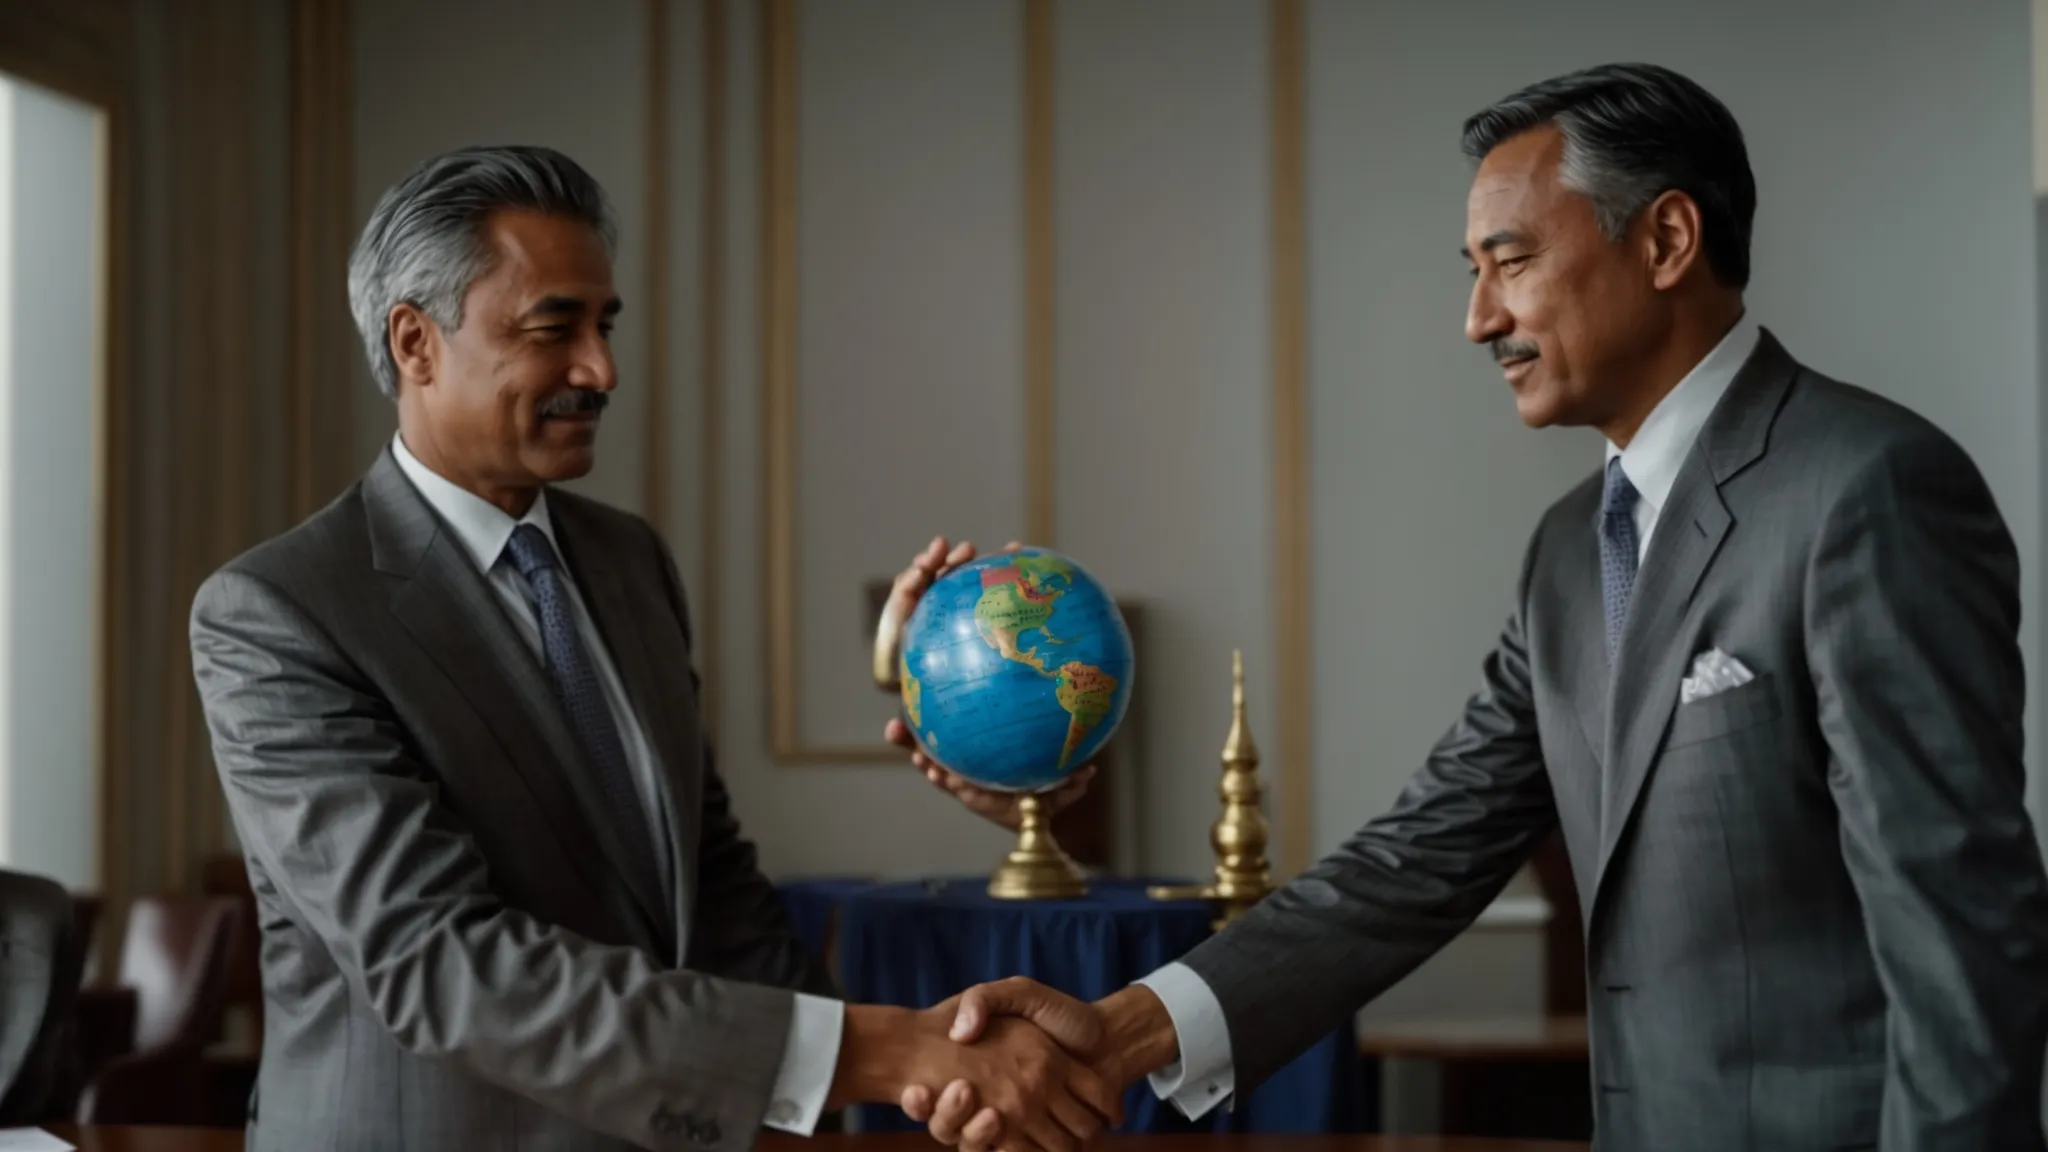 two government officials shake hands over a table with a globe in the background, symbolizing international cooperation and agreement.